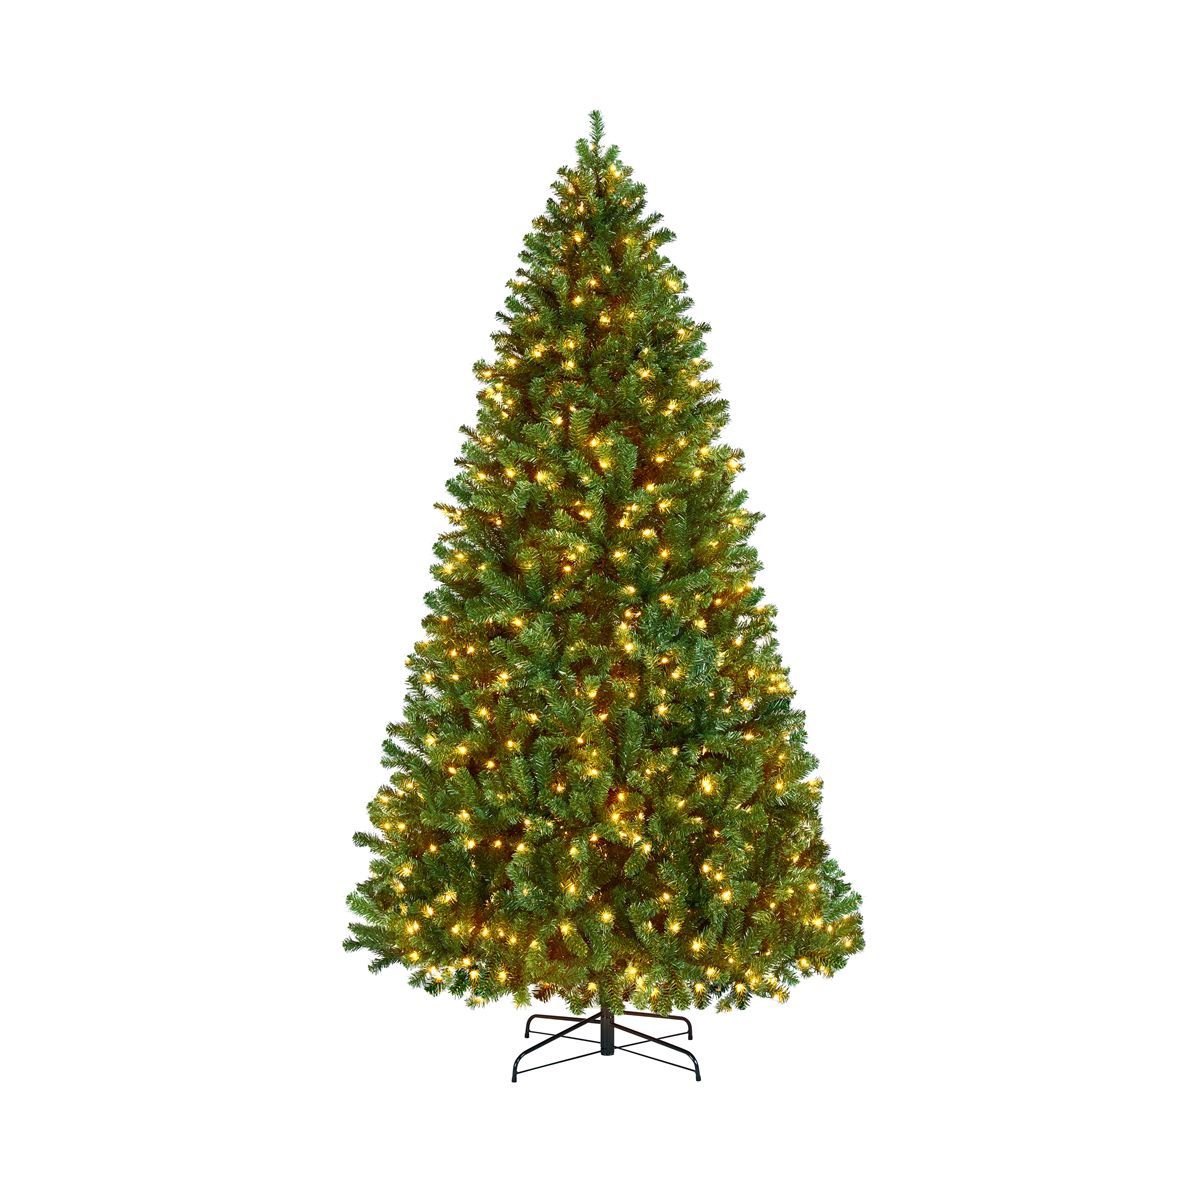 Yaheetech Pre-lit Spruce Artificial Christmas Tree with 150 Incandescent Warm White Lights | Target